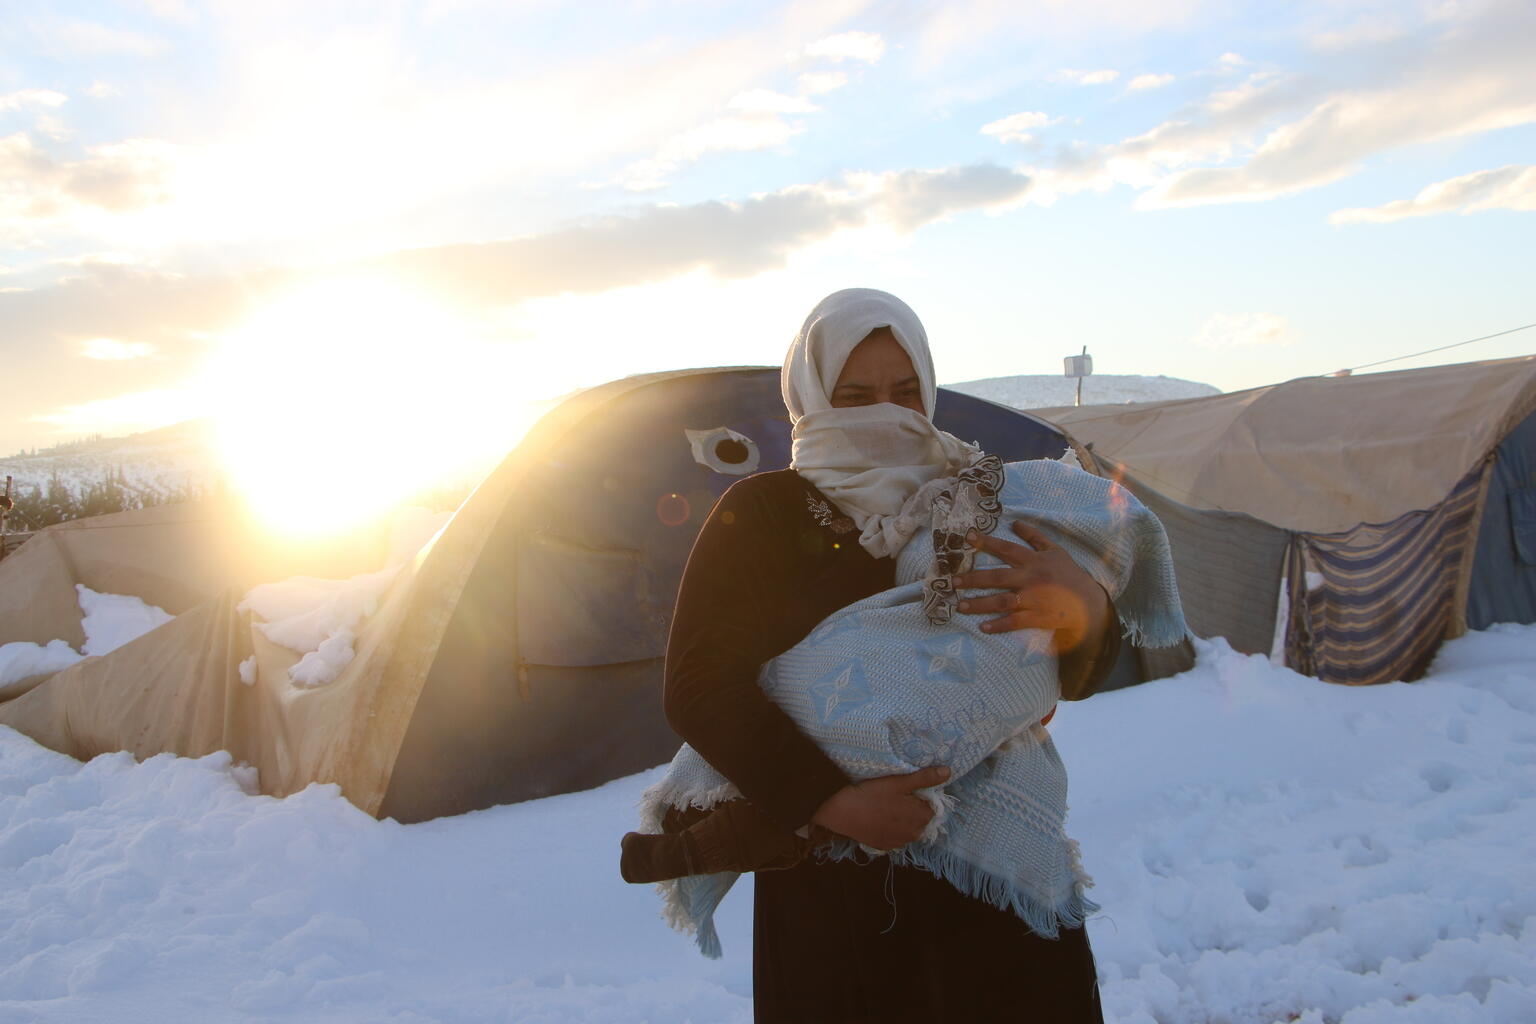 On 19 January 2022 at an Internally Displaced Person (IDP) camp in Northwest Syria, a mother carries her child fearing for their lives as temperatures drop.